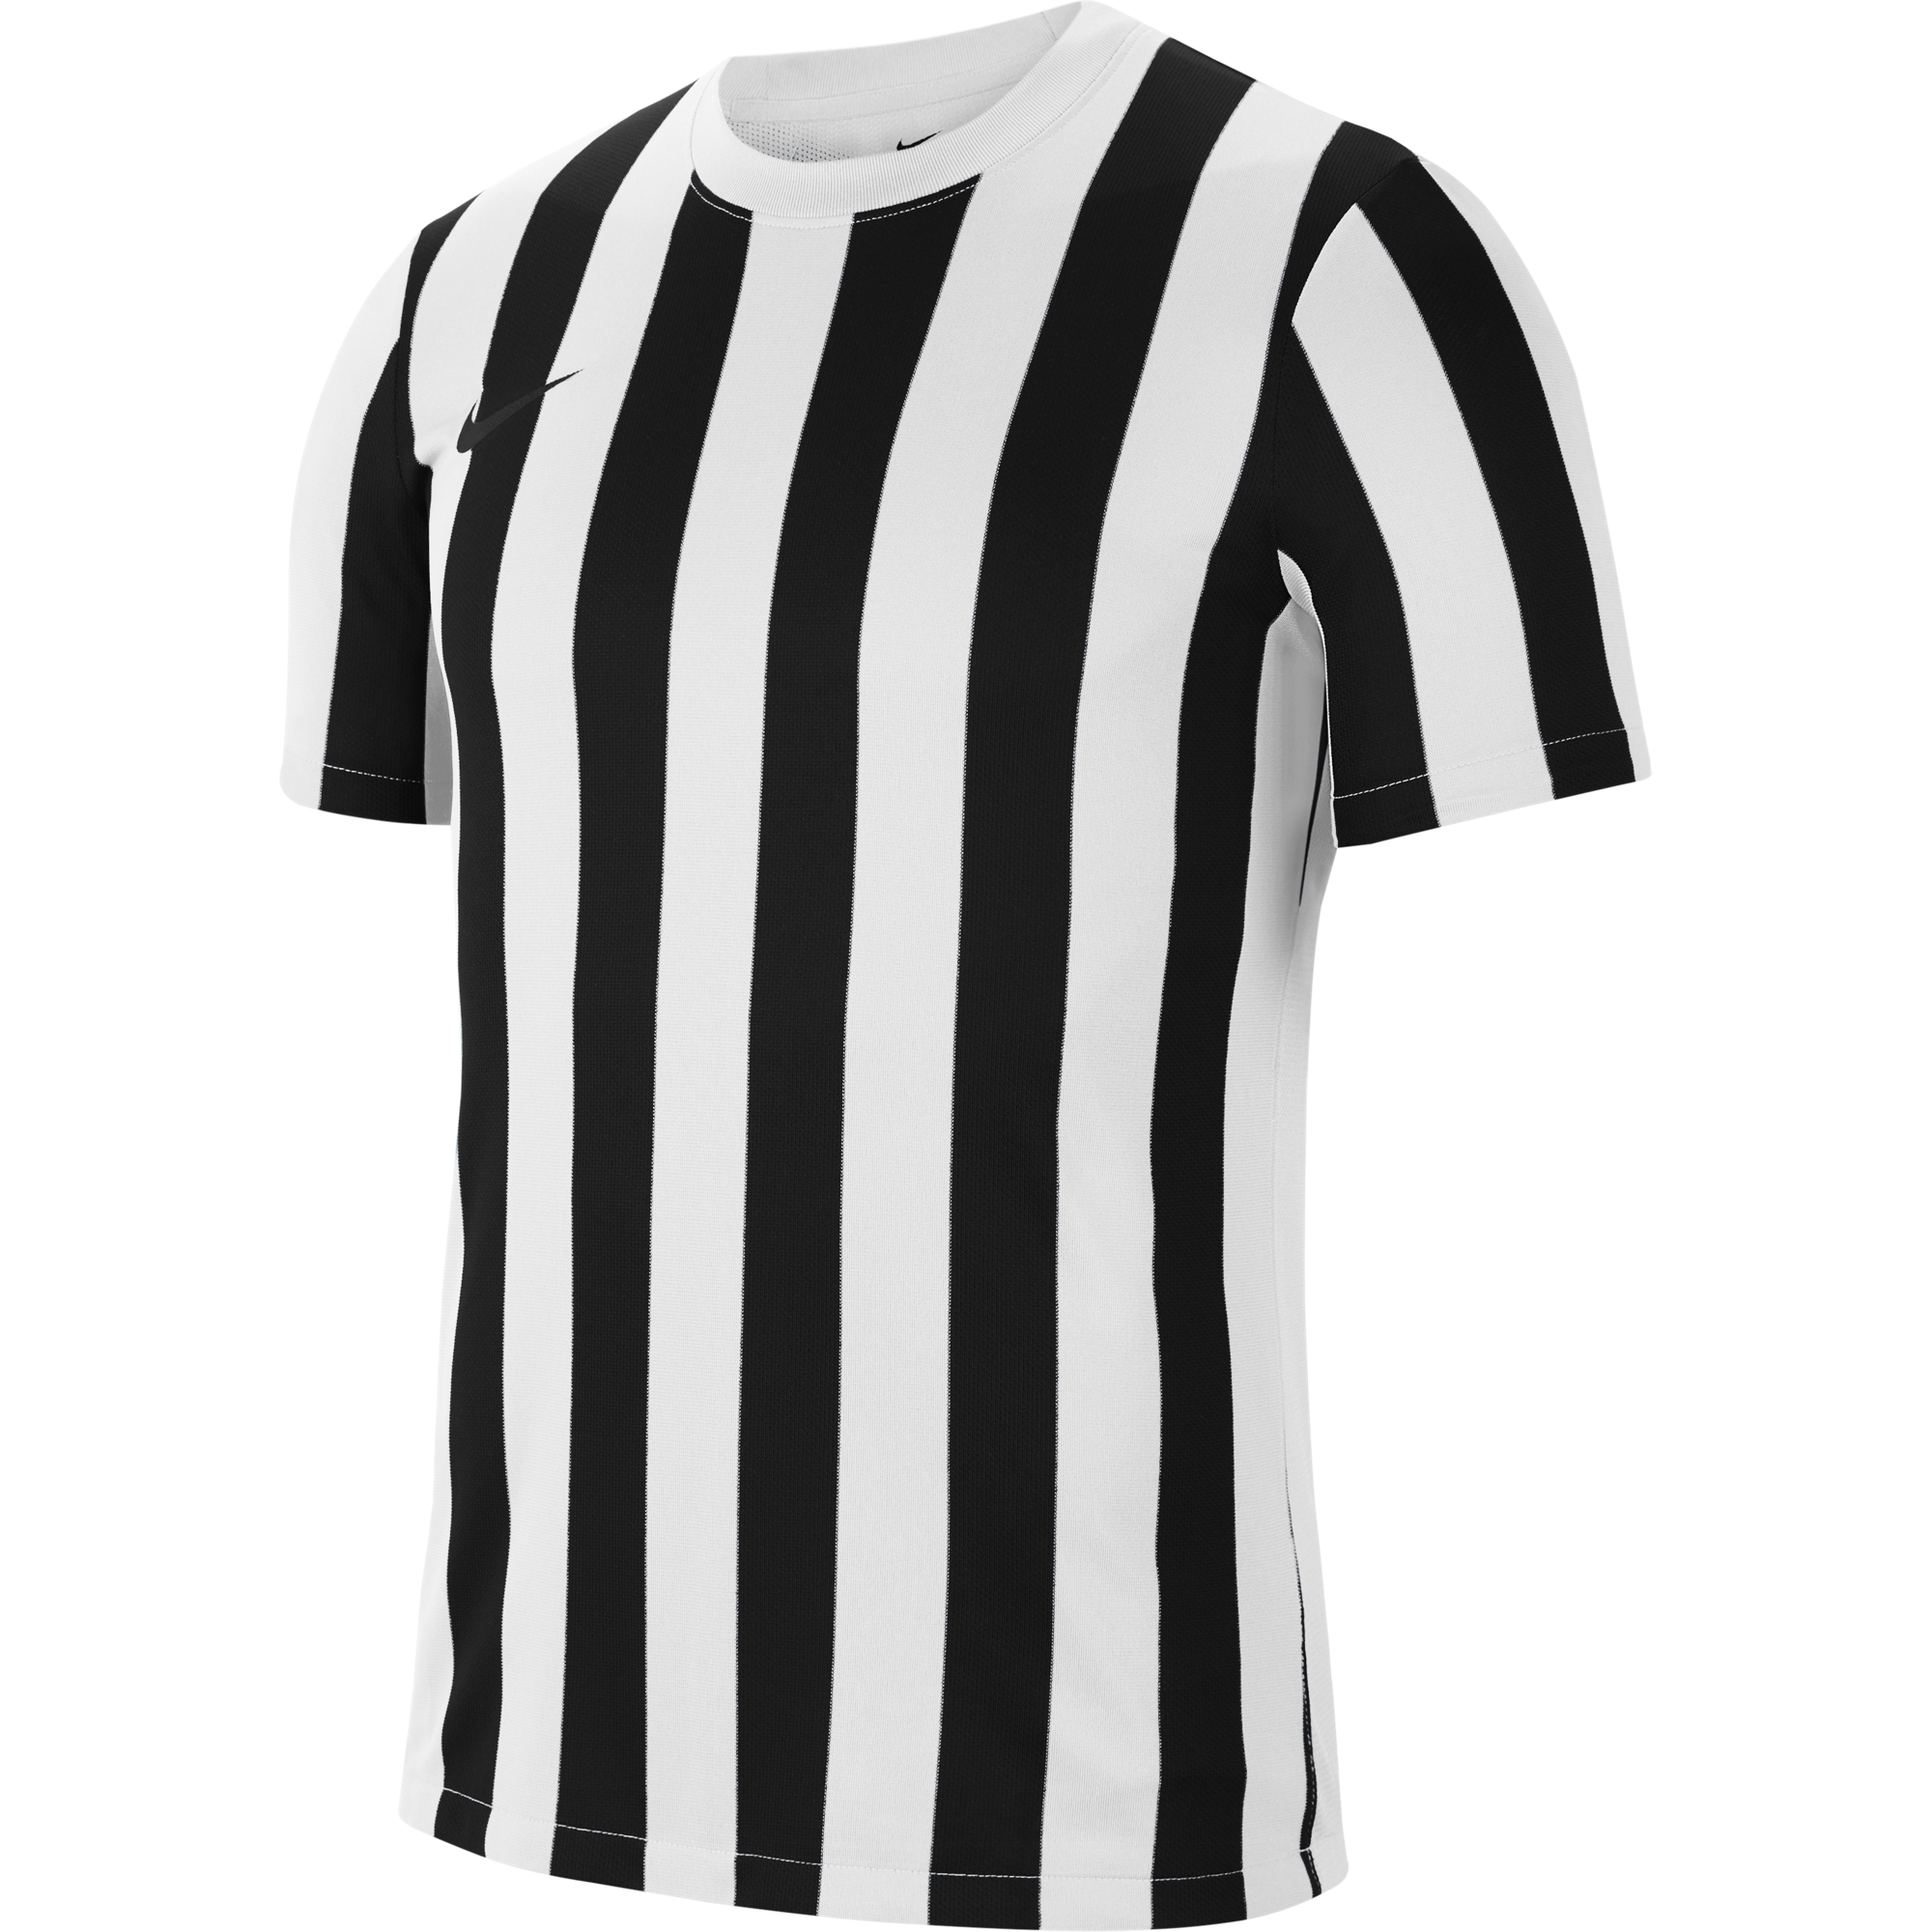 Striped Division IV Jersey S/S